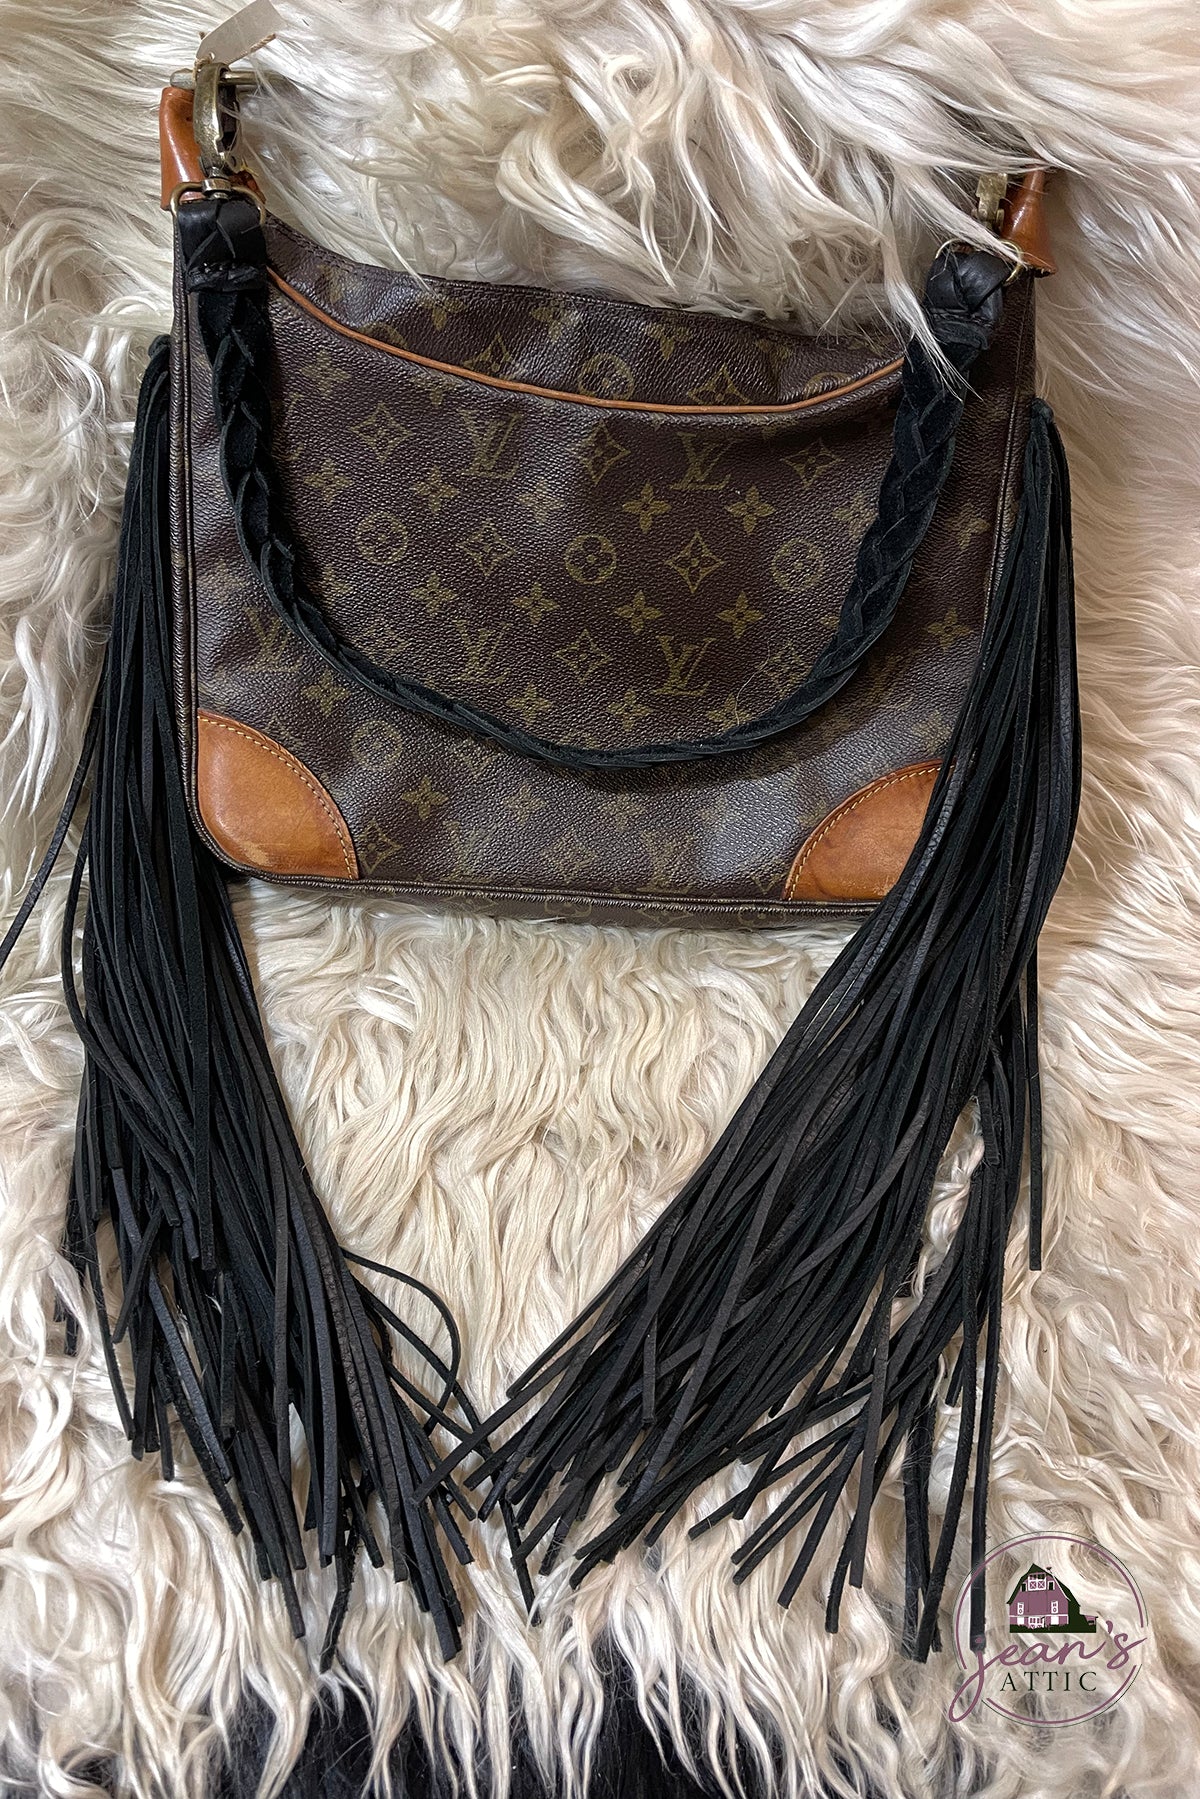 louis vuitton with braided strap